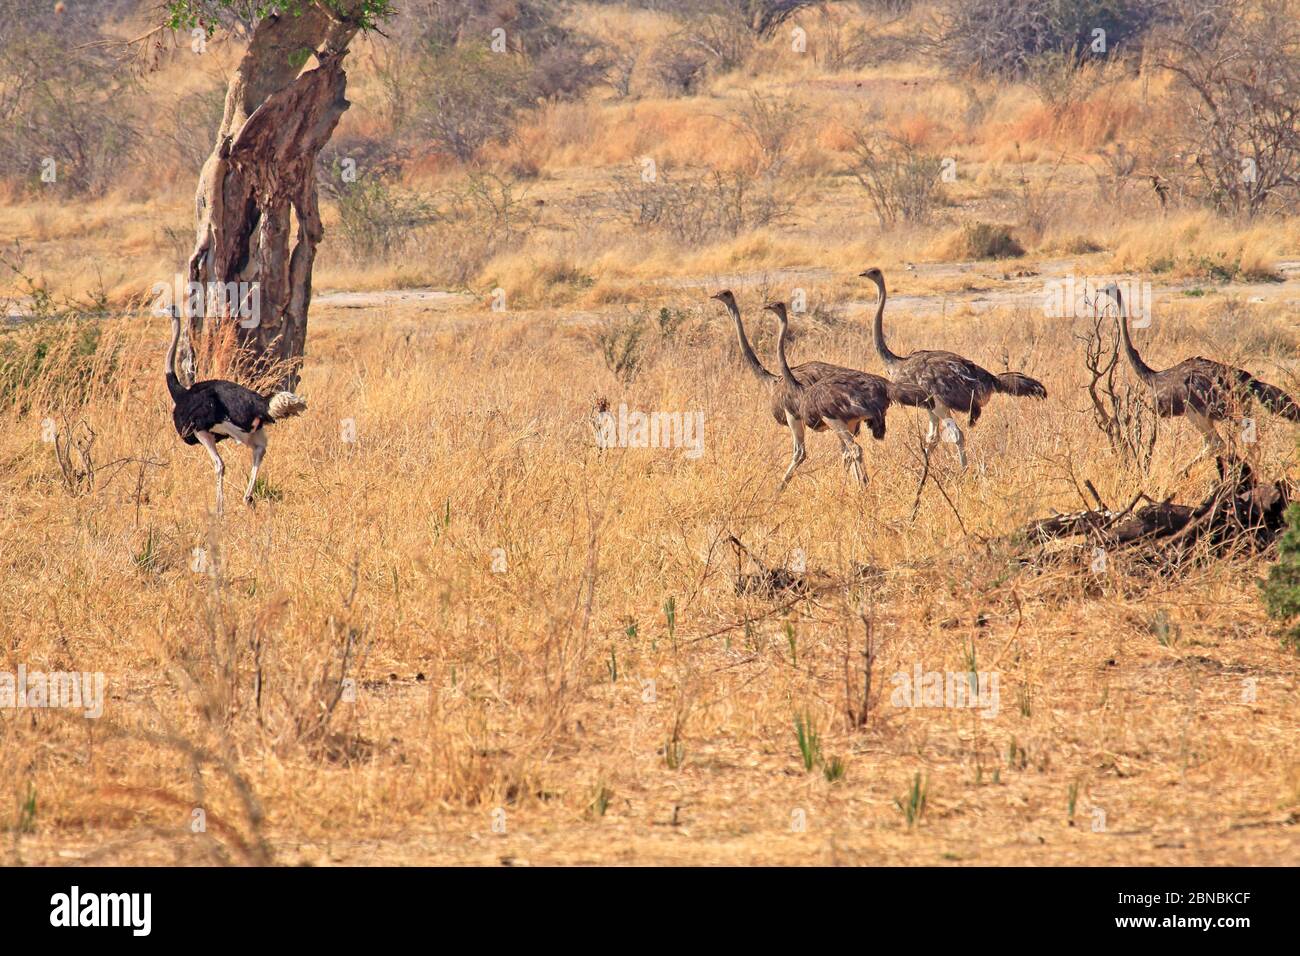 A family of ostrich travel through the grasslands of Tanzania Stock Photo